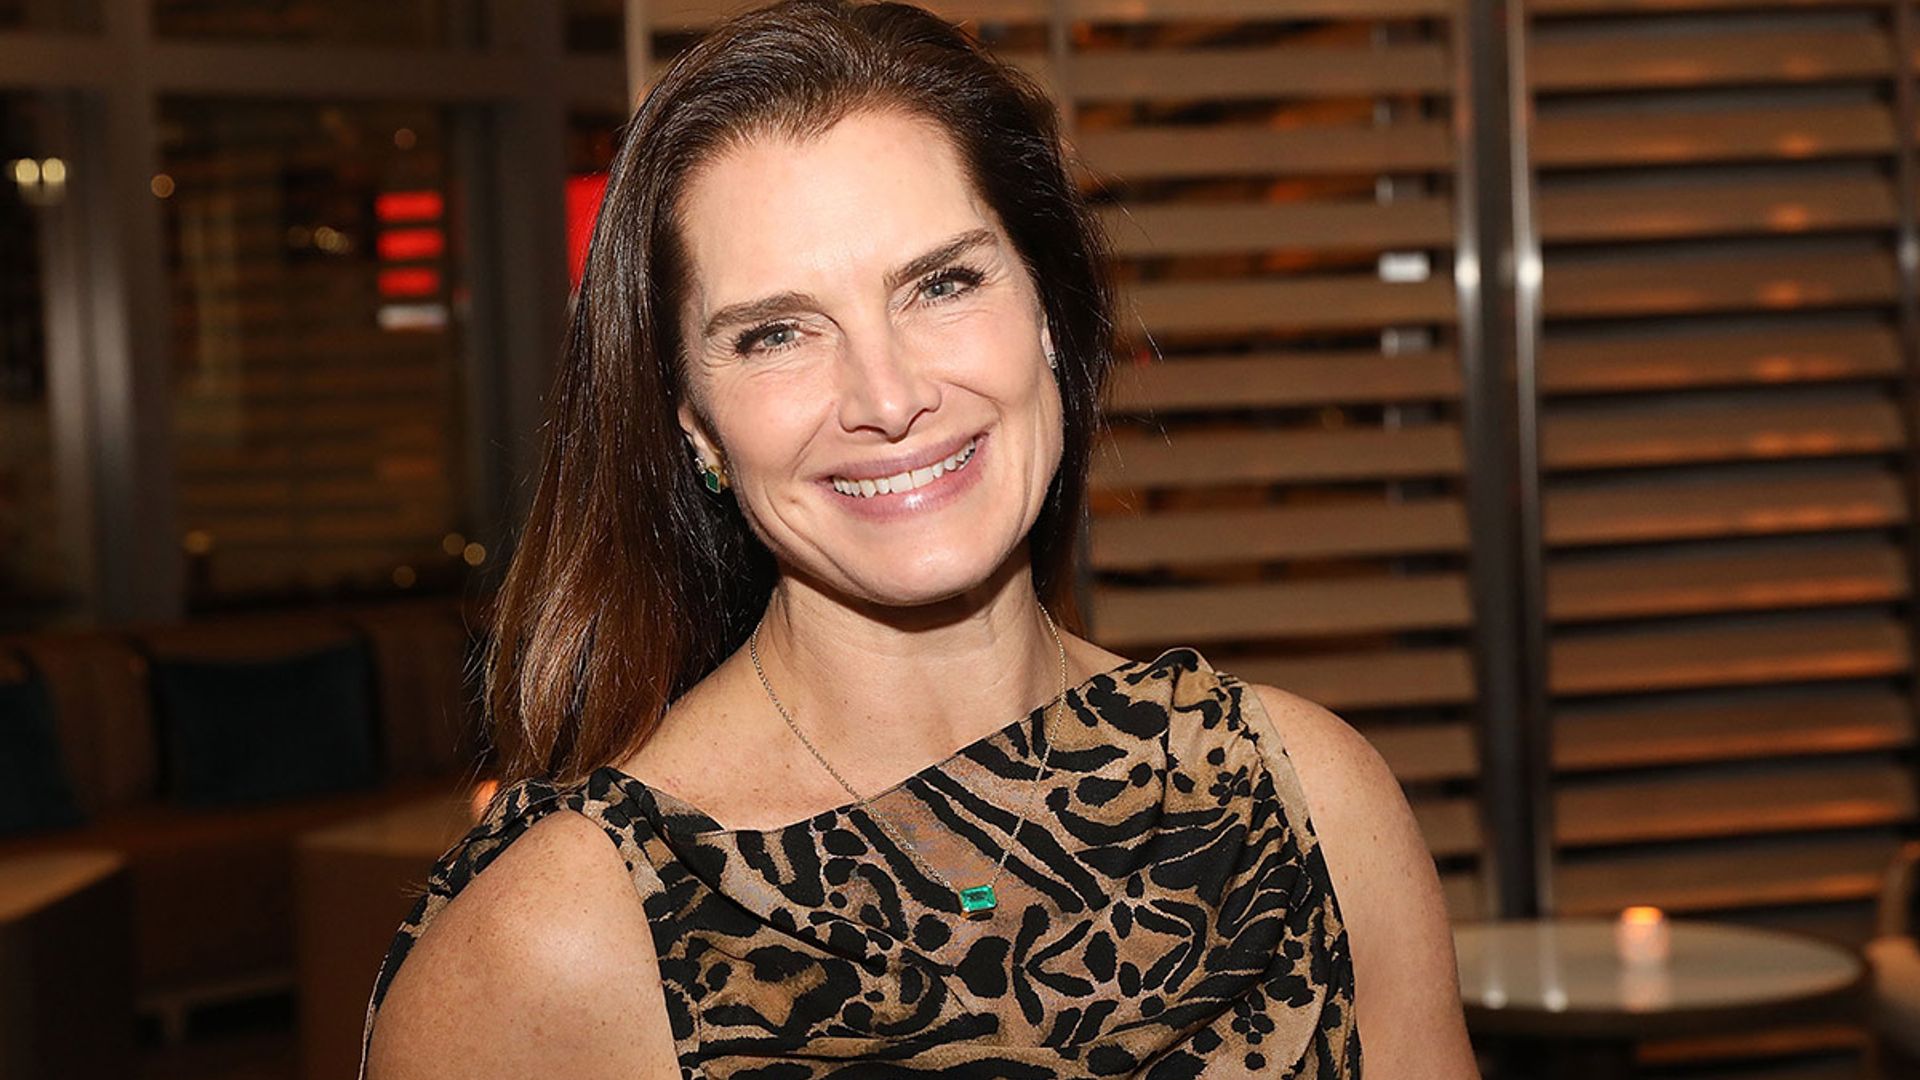 Brooke Shields Thrills Fans With Epic Selfie From The 1980s Hello 